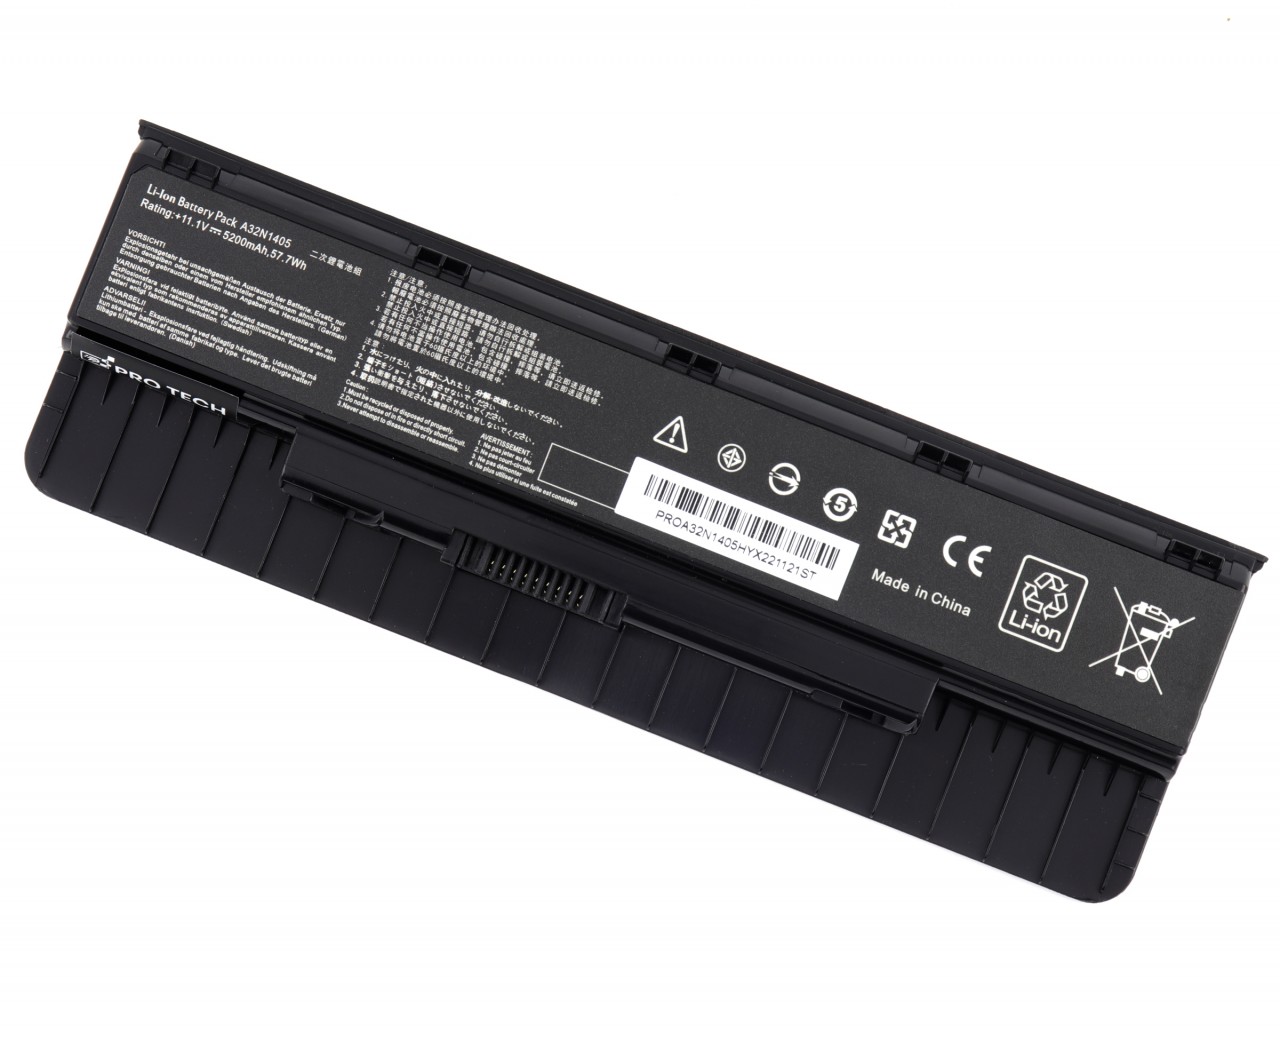 Baterie Asus N76VJ-T5004H 57.7Wh / 5200mAh Protech High Quality Replacement